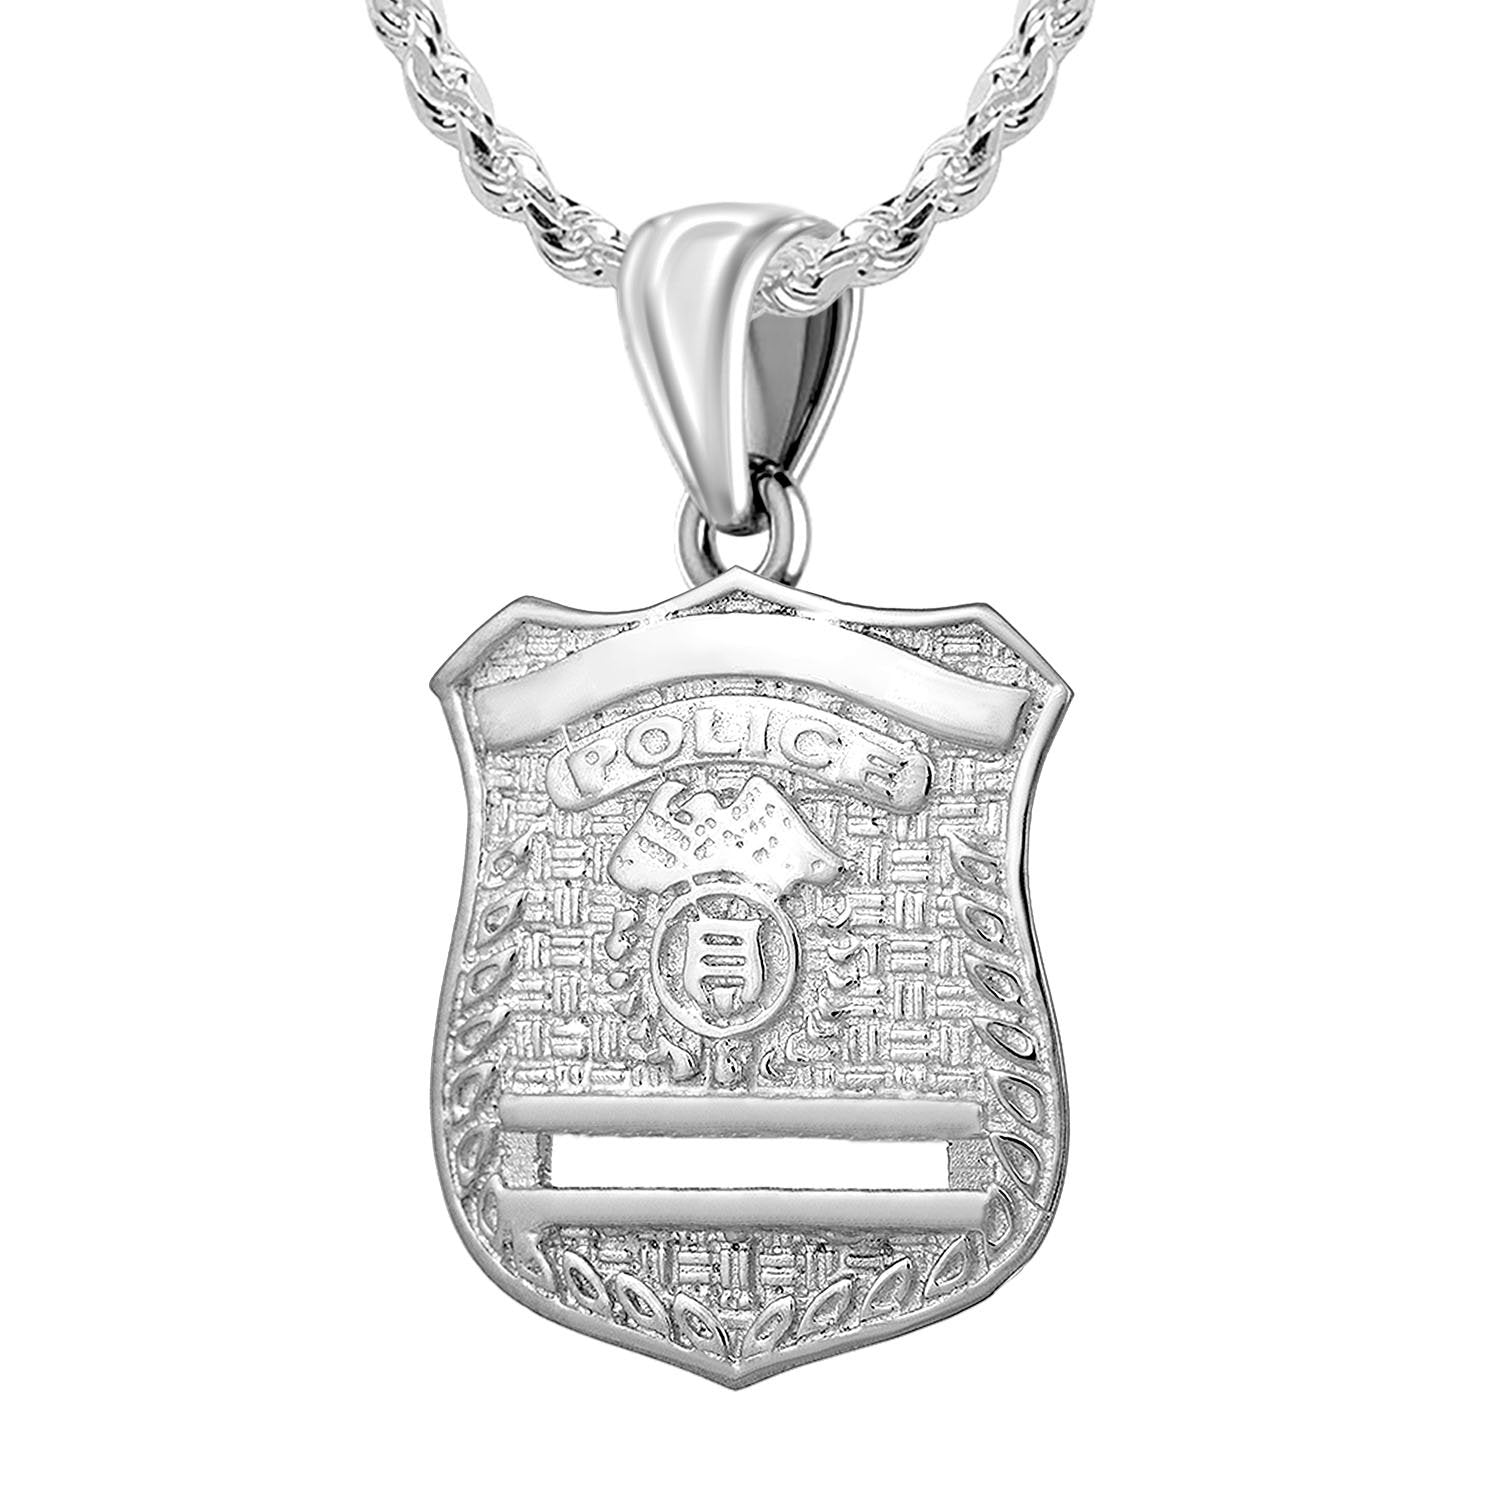 Police Badge Necklace In Silver - 2.5mm Rope Chain